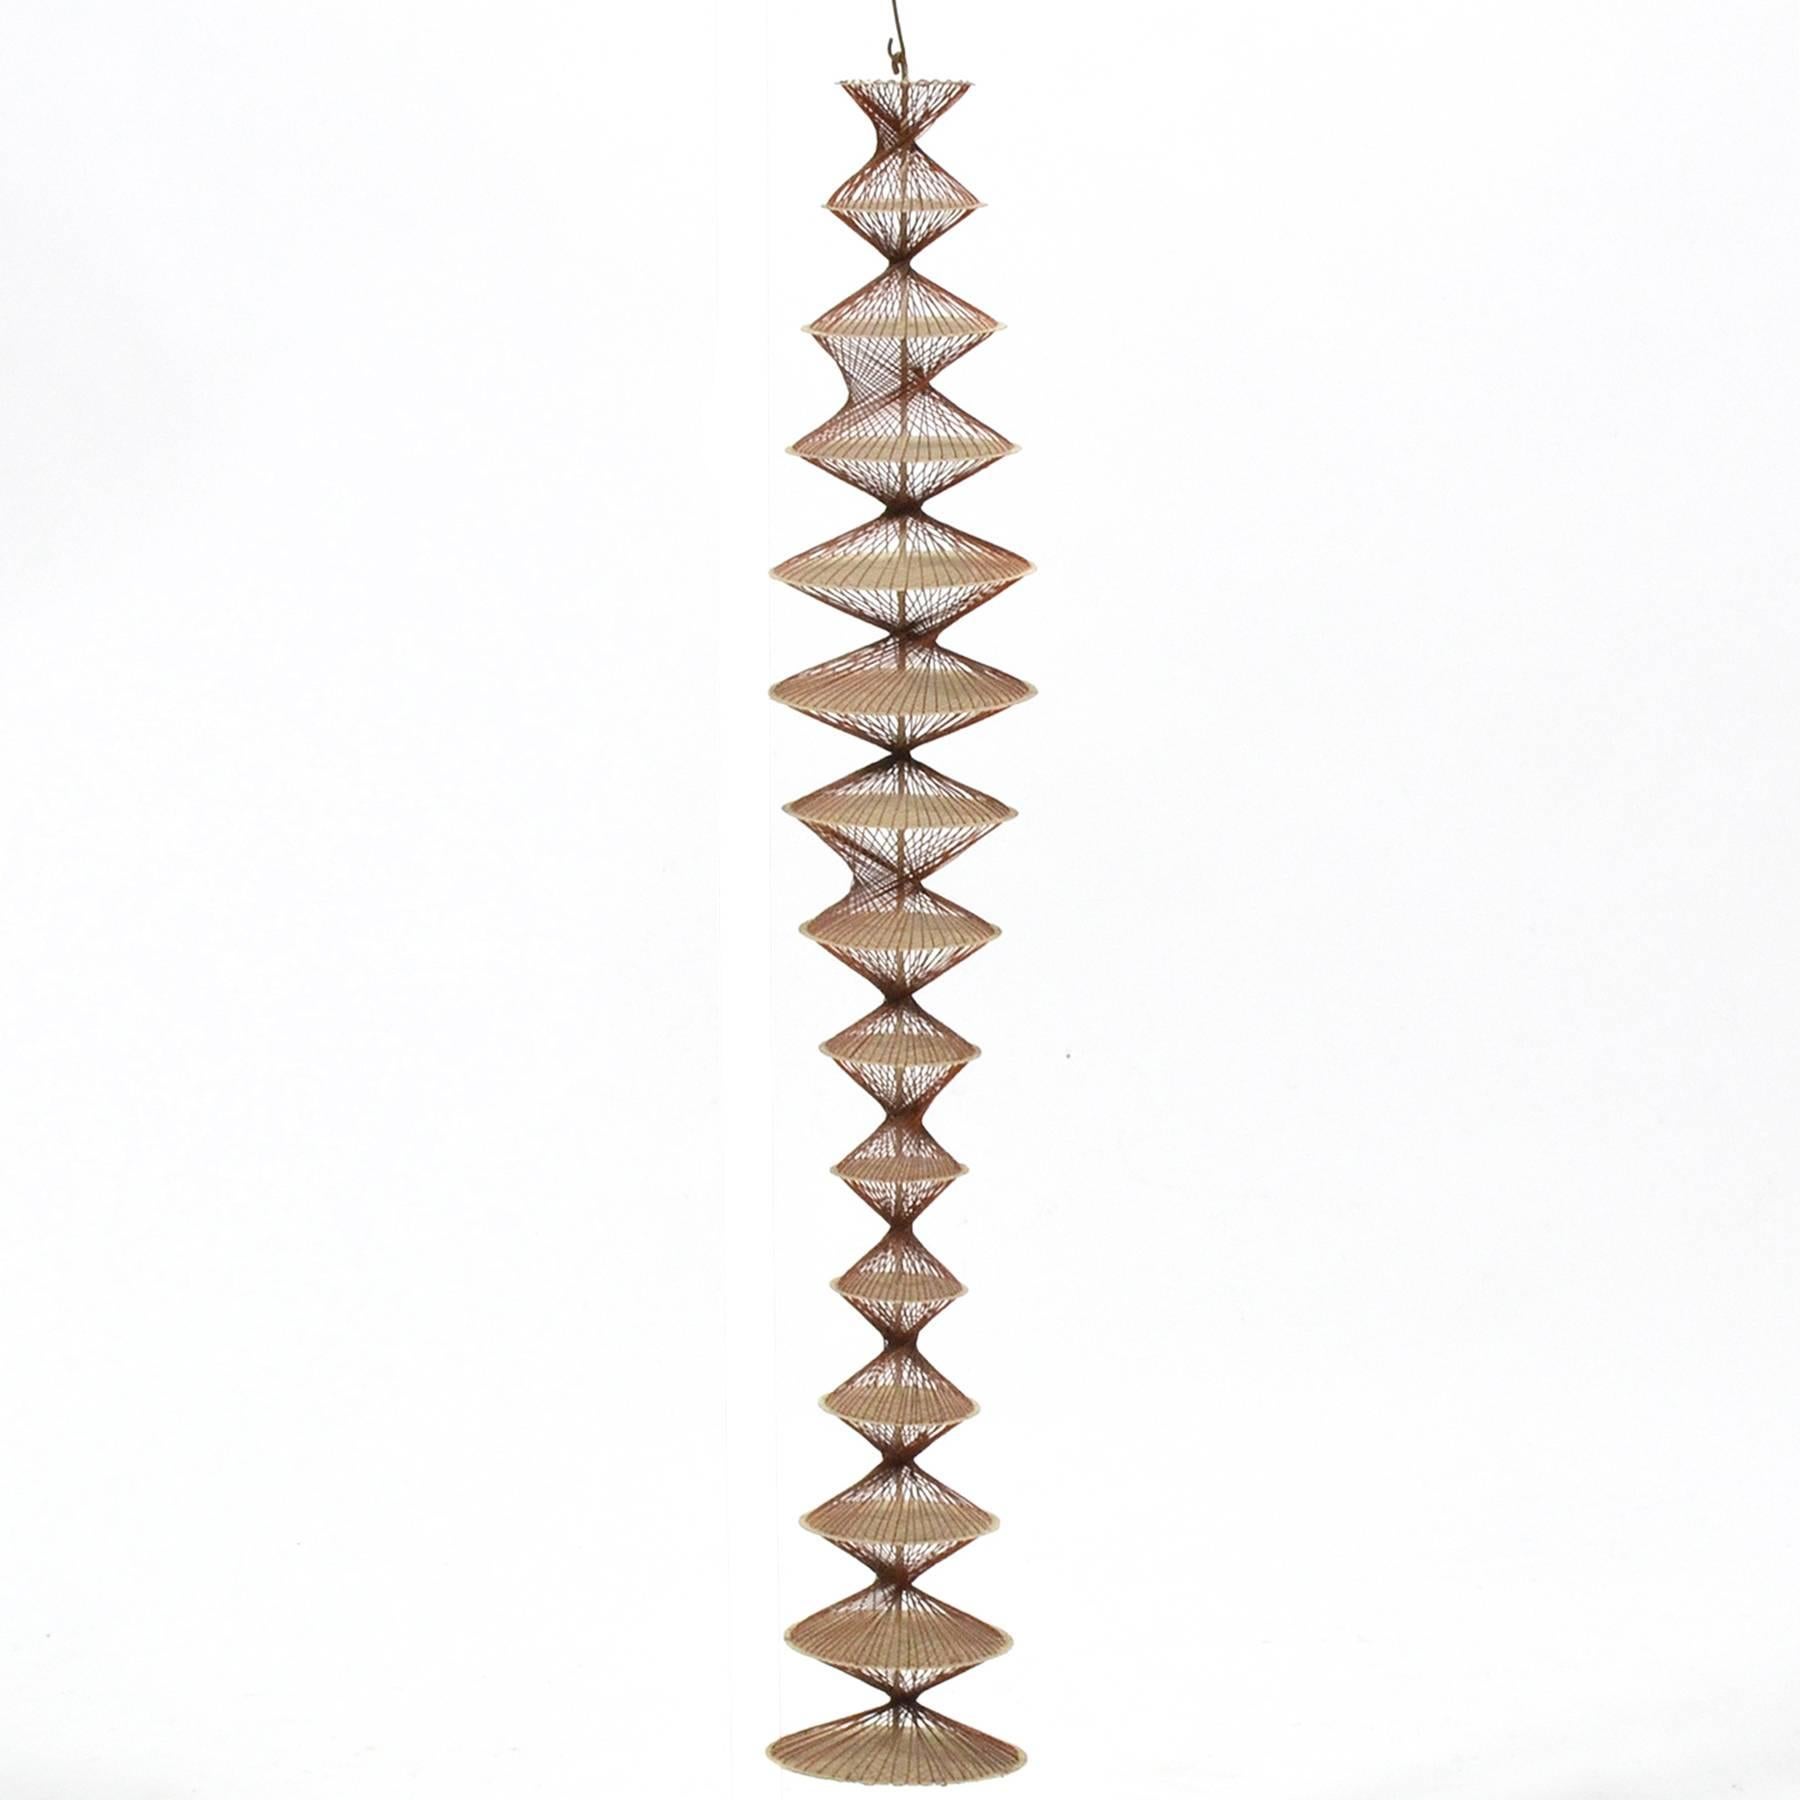 Abstract Geometric Sculpture in Steel and String For Sale 2